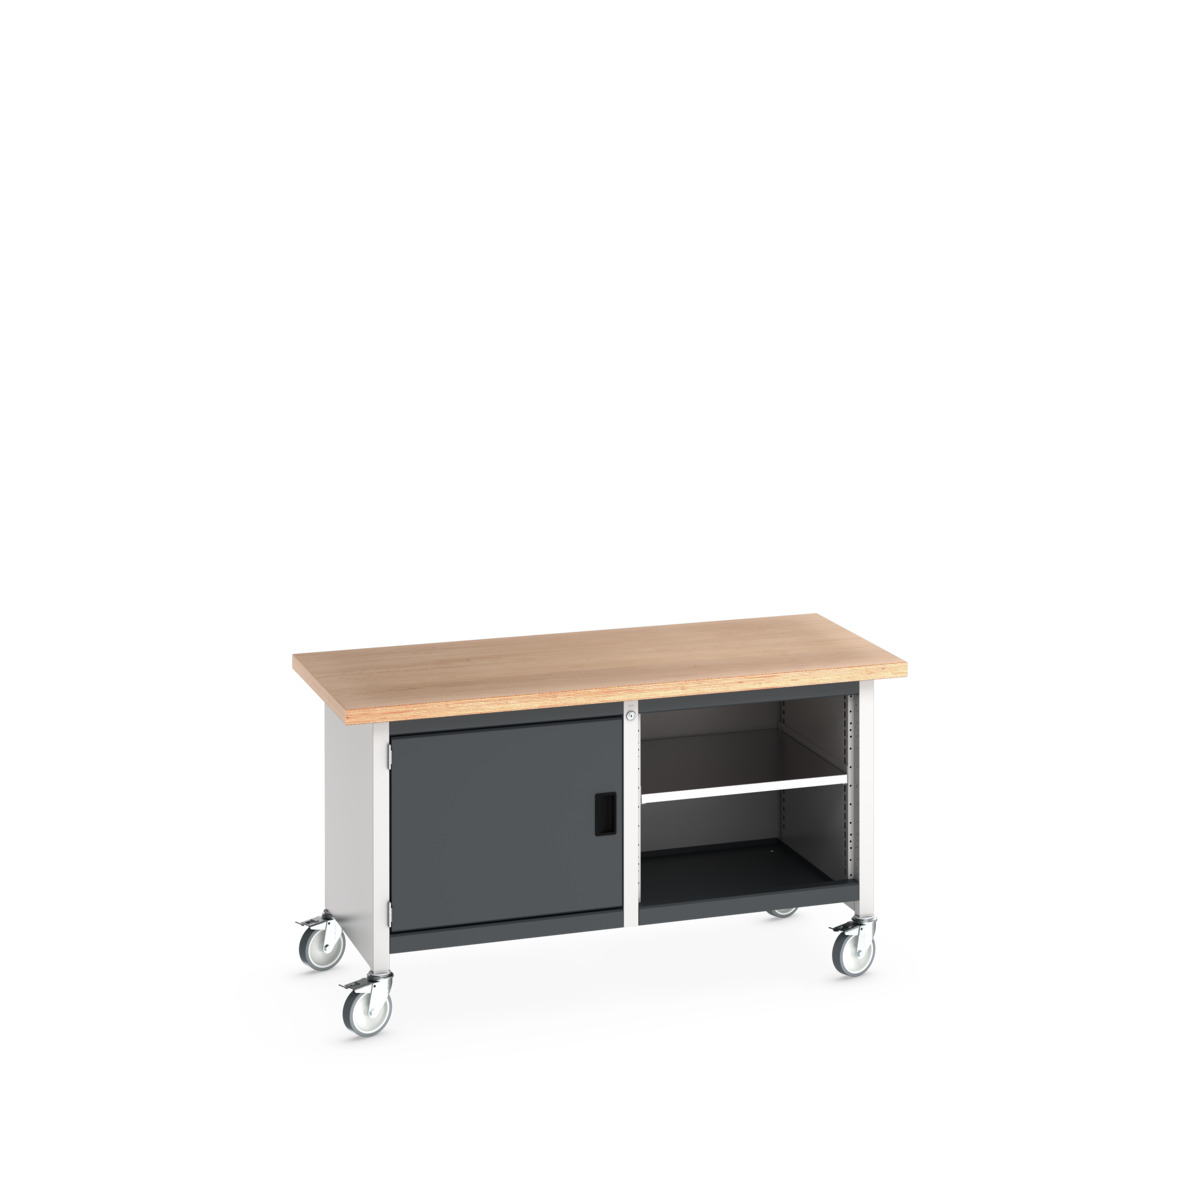 41002094.19V - cubio mobile storage bench (mpx)